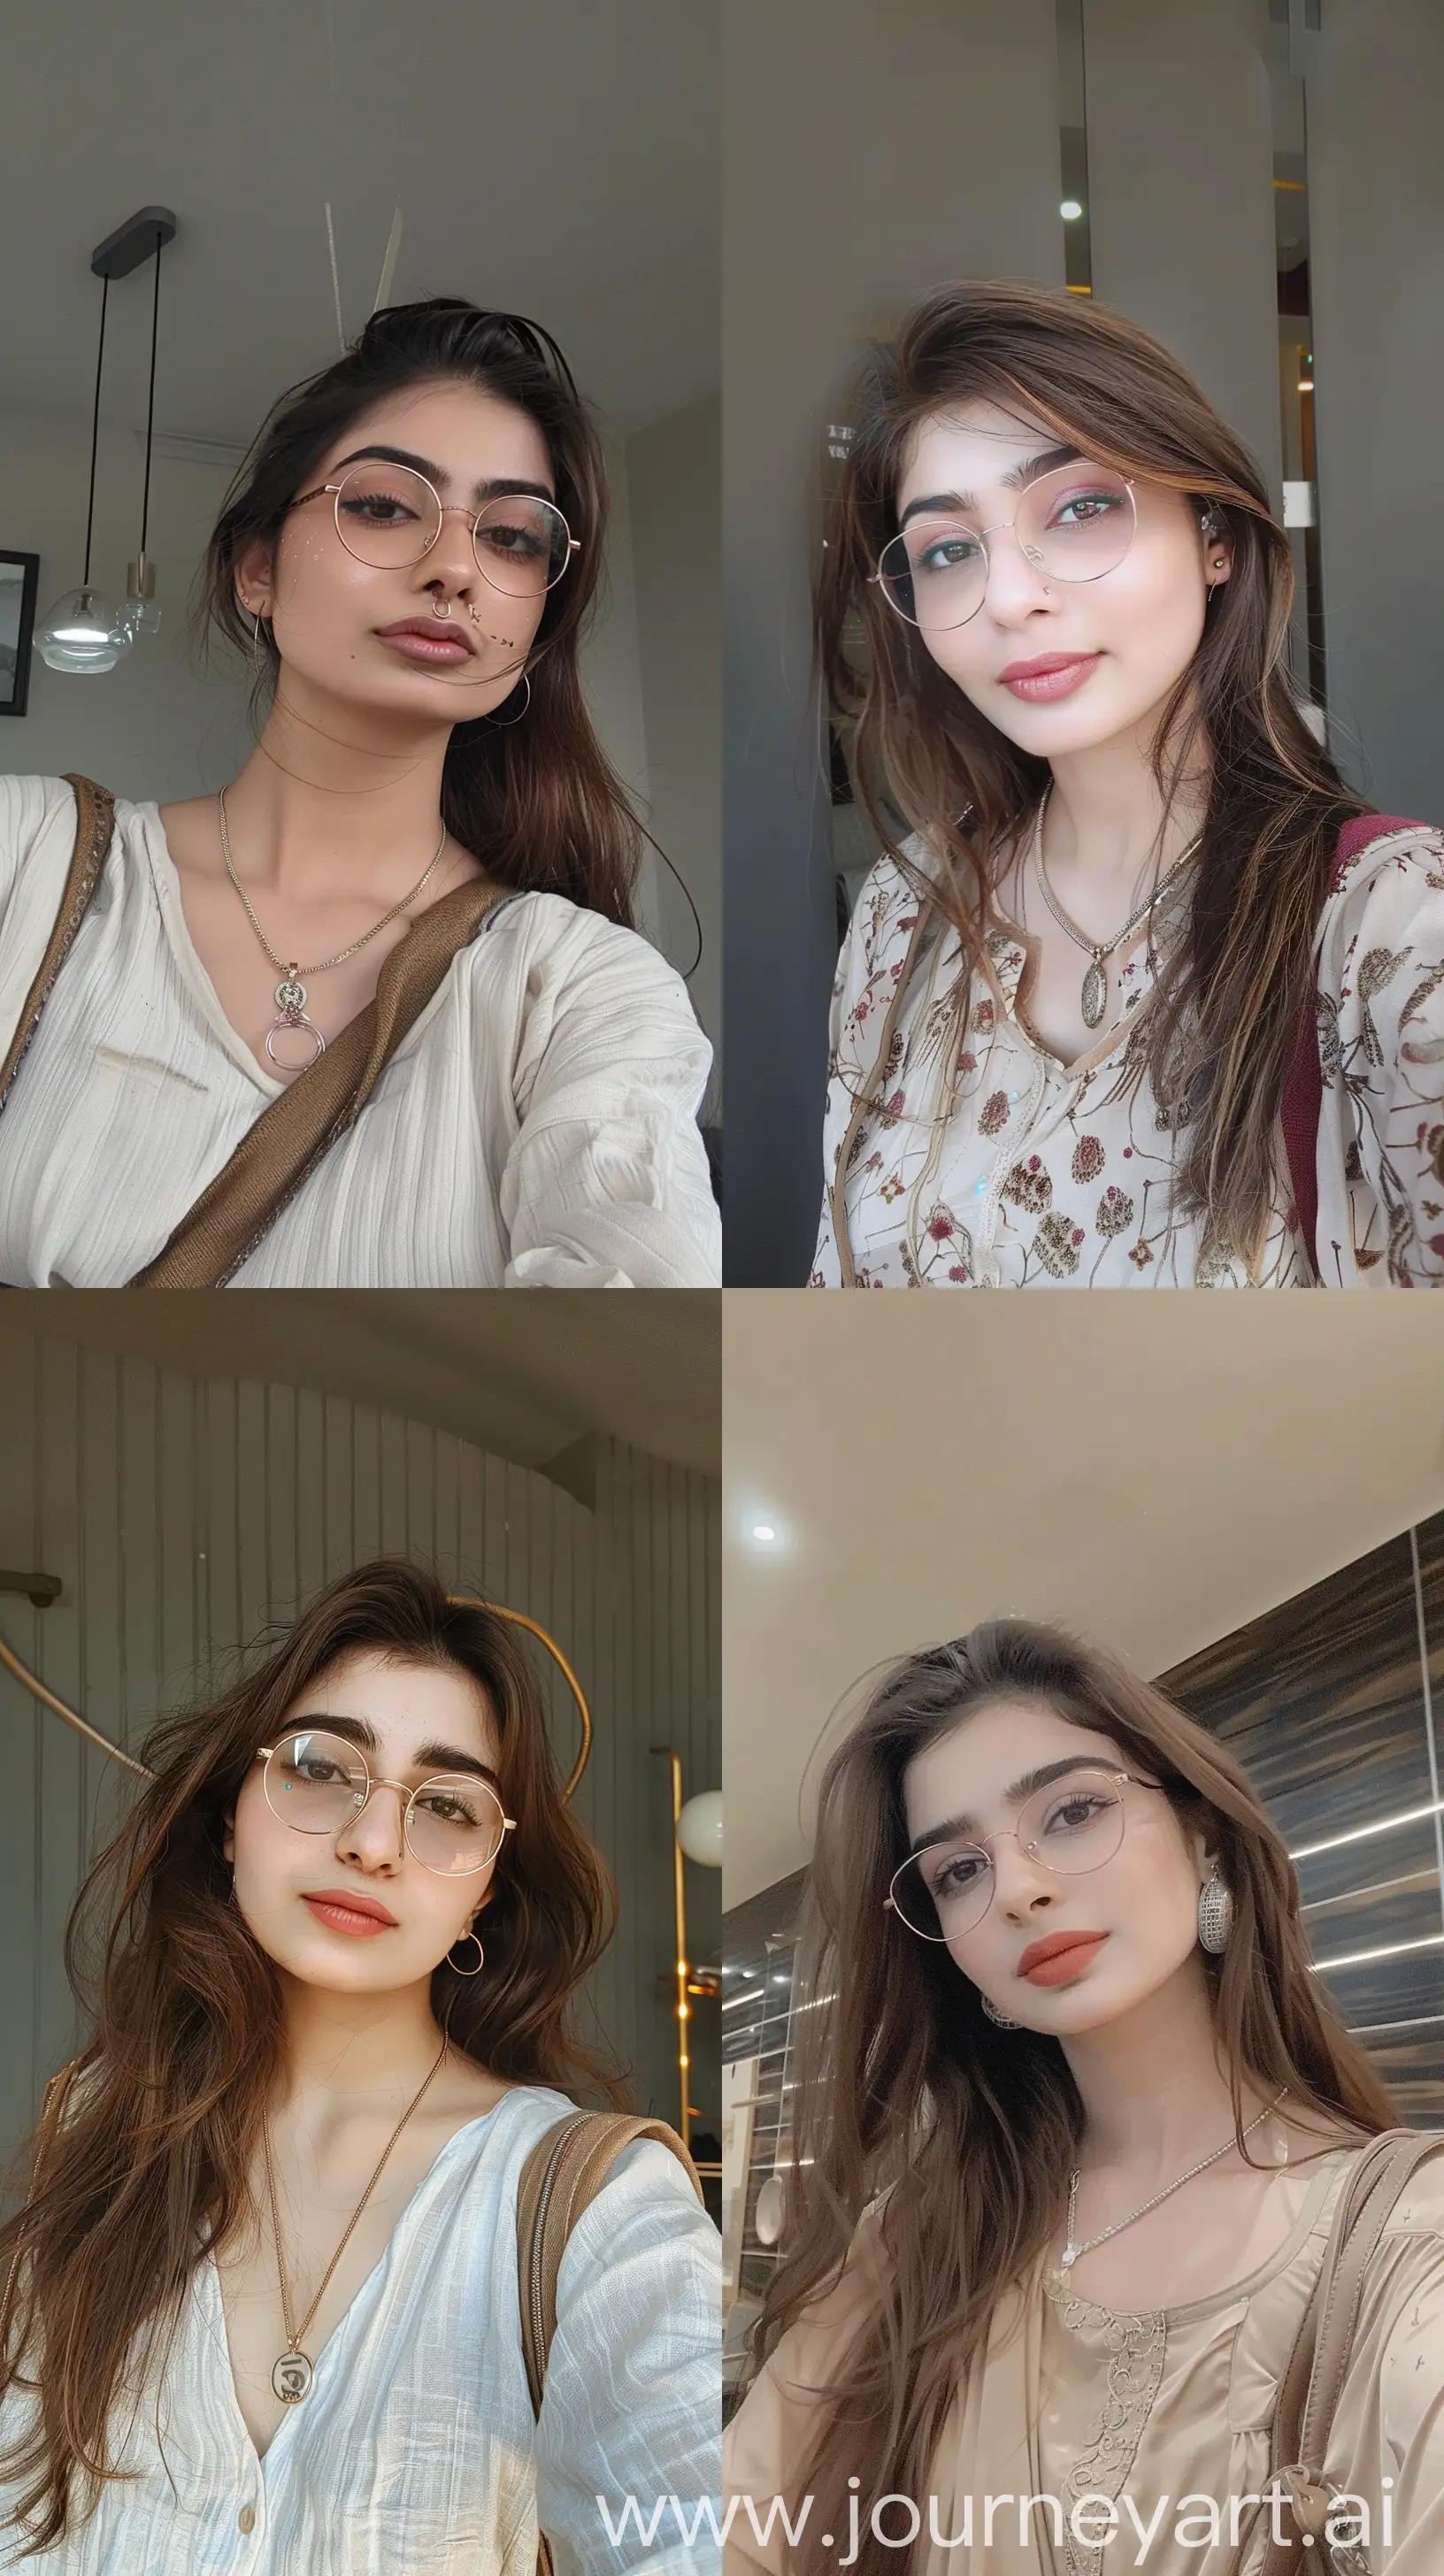 A good looking Pakistani girl, selfie, wearing simple clothes, aesthetic make up, cute, wearing stylish necklace, stylish glasses,stylish shoulder bag, modern wall --ar 9:16